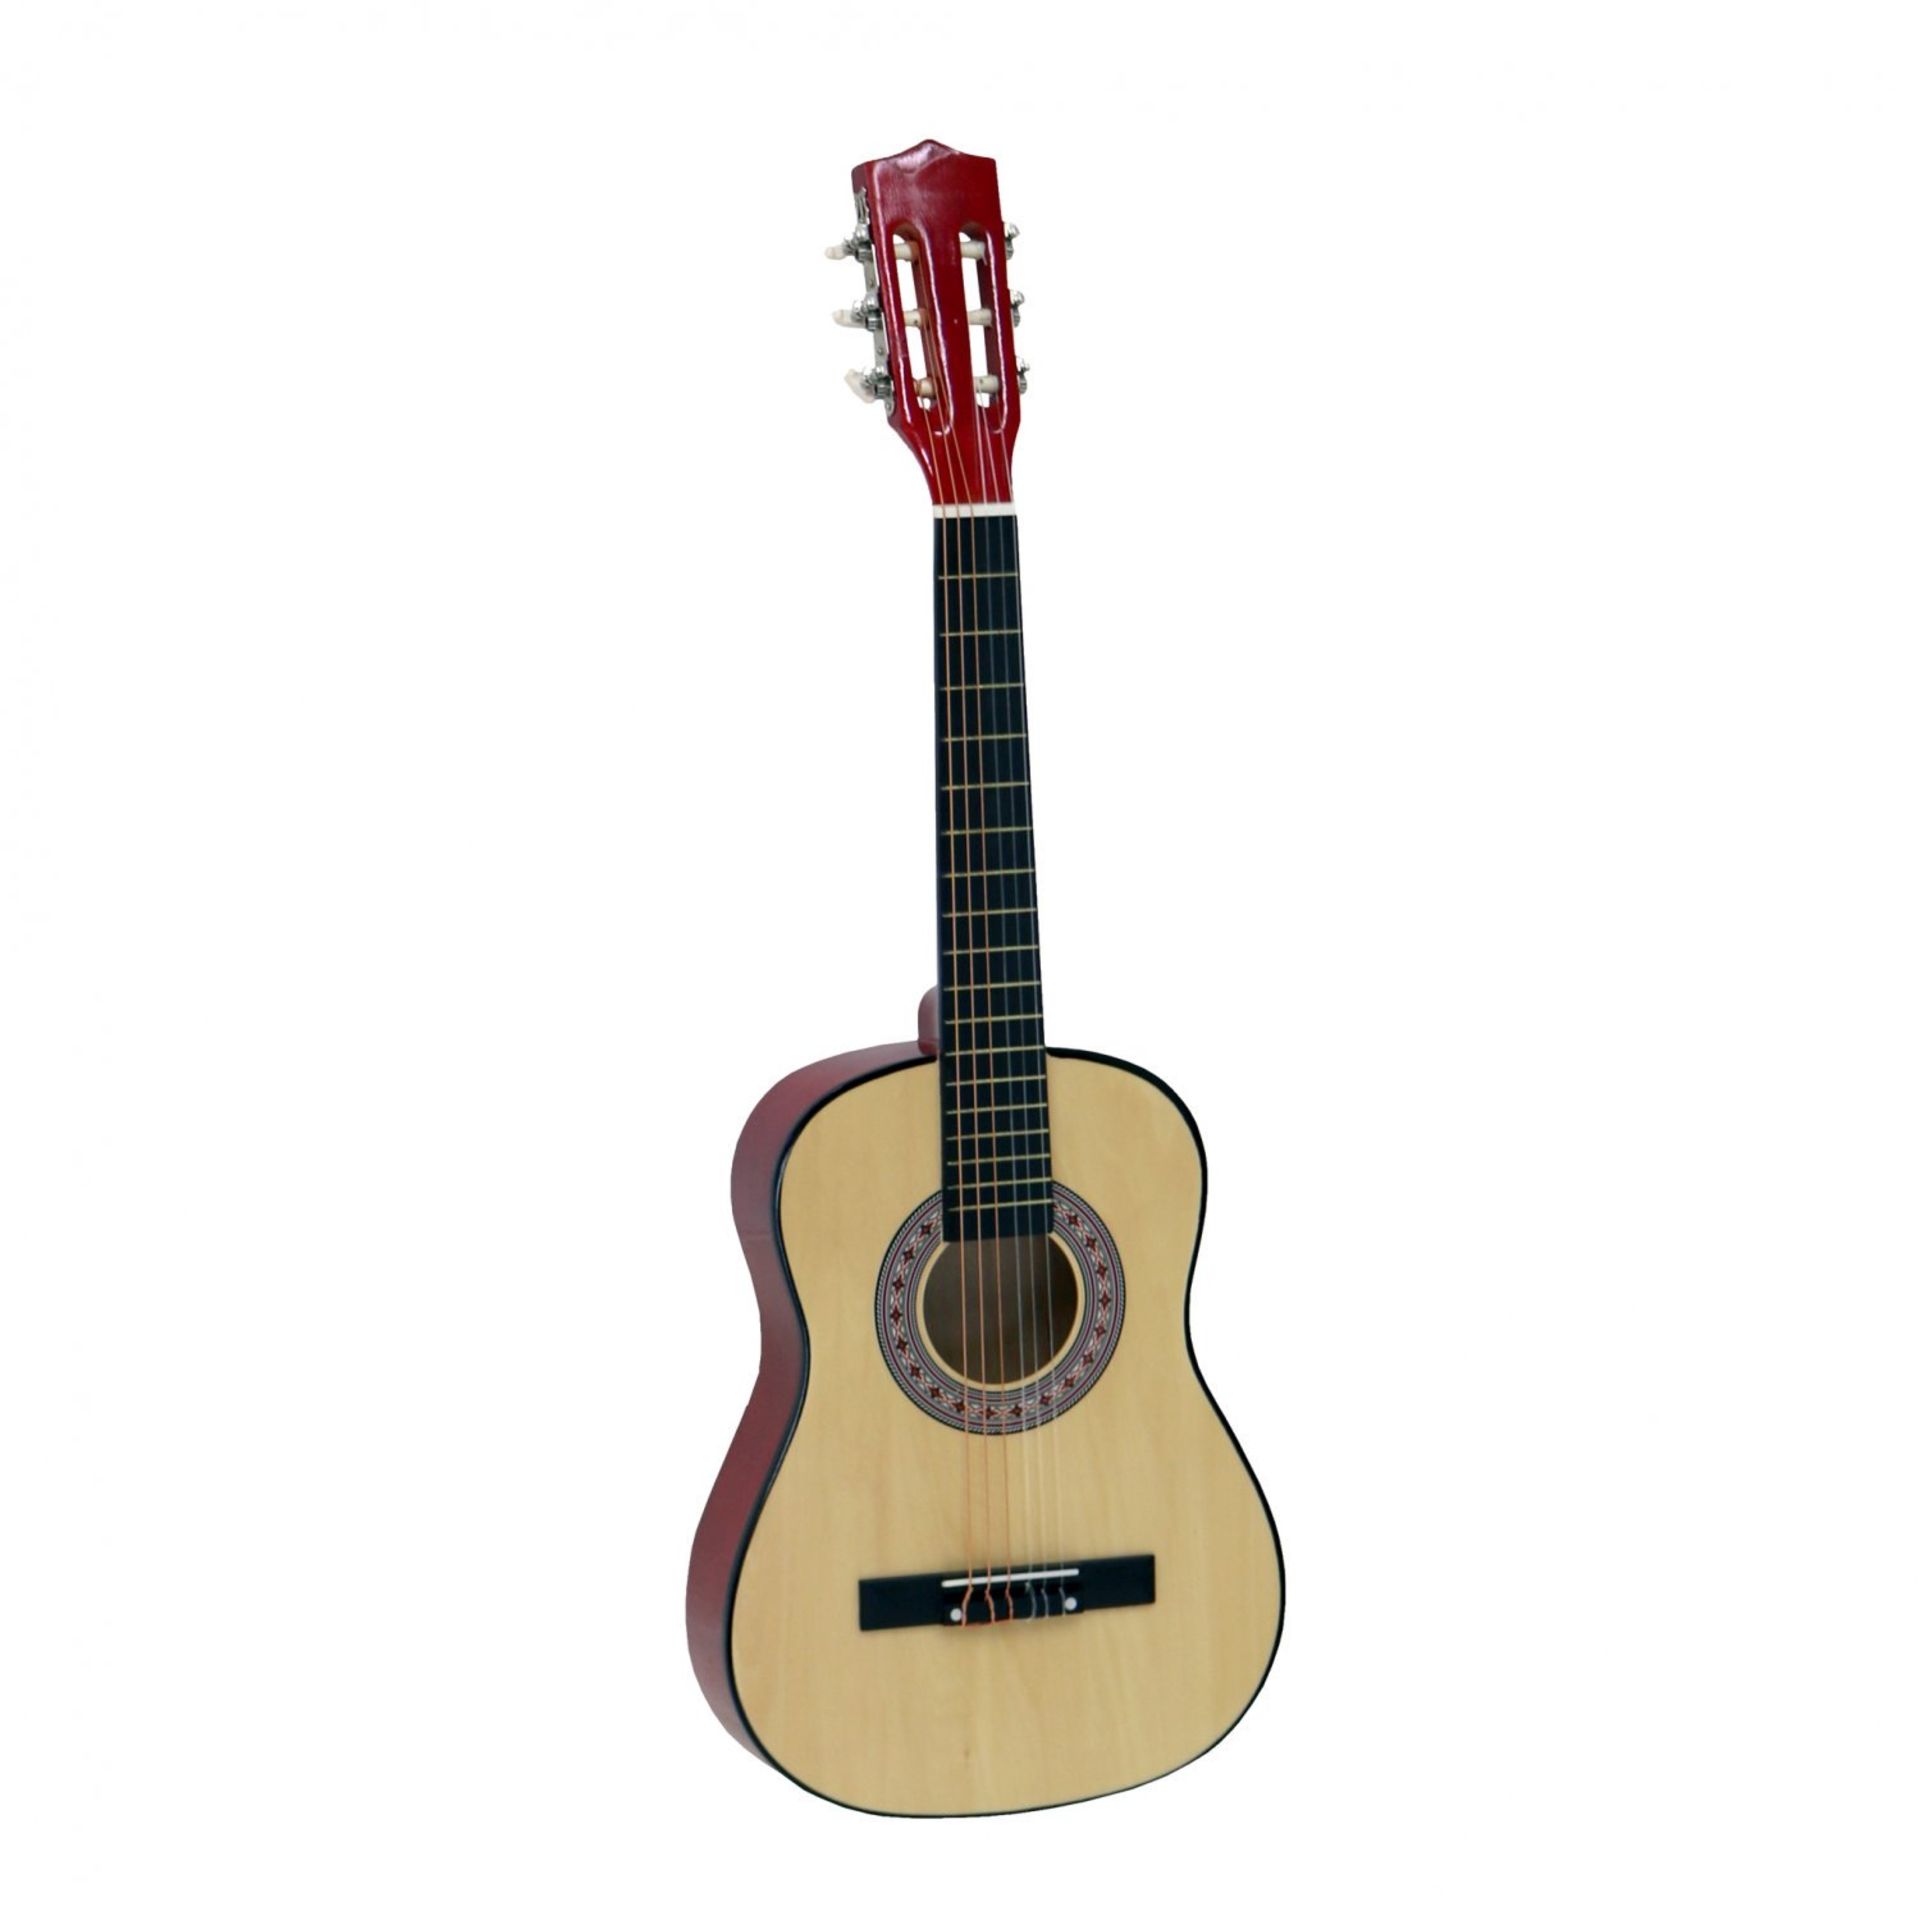 (RU295) 34" Half Size 1/2 6 String Classical Acoustic Guitar Perfect for children and begi...